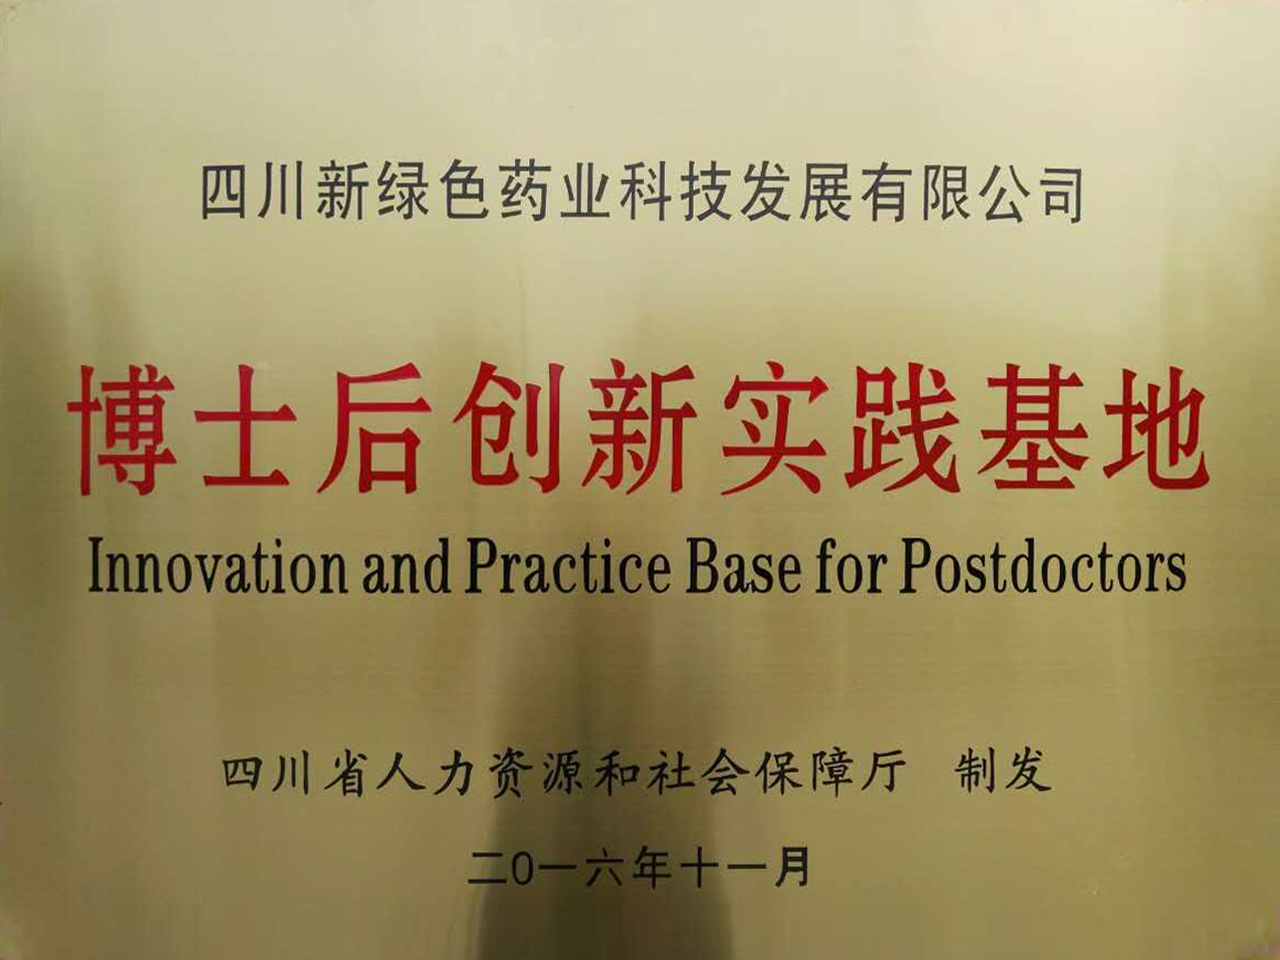 Copy of plaque of postdoctoral innovation practice base